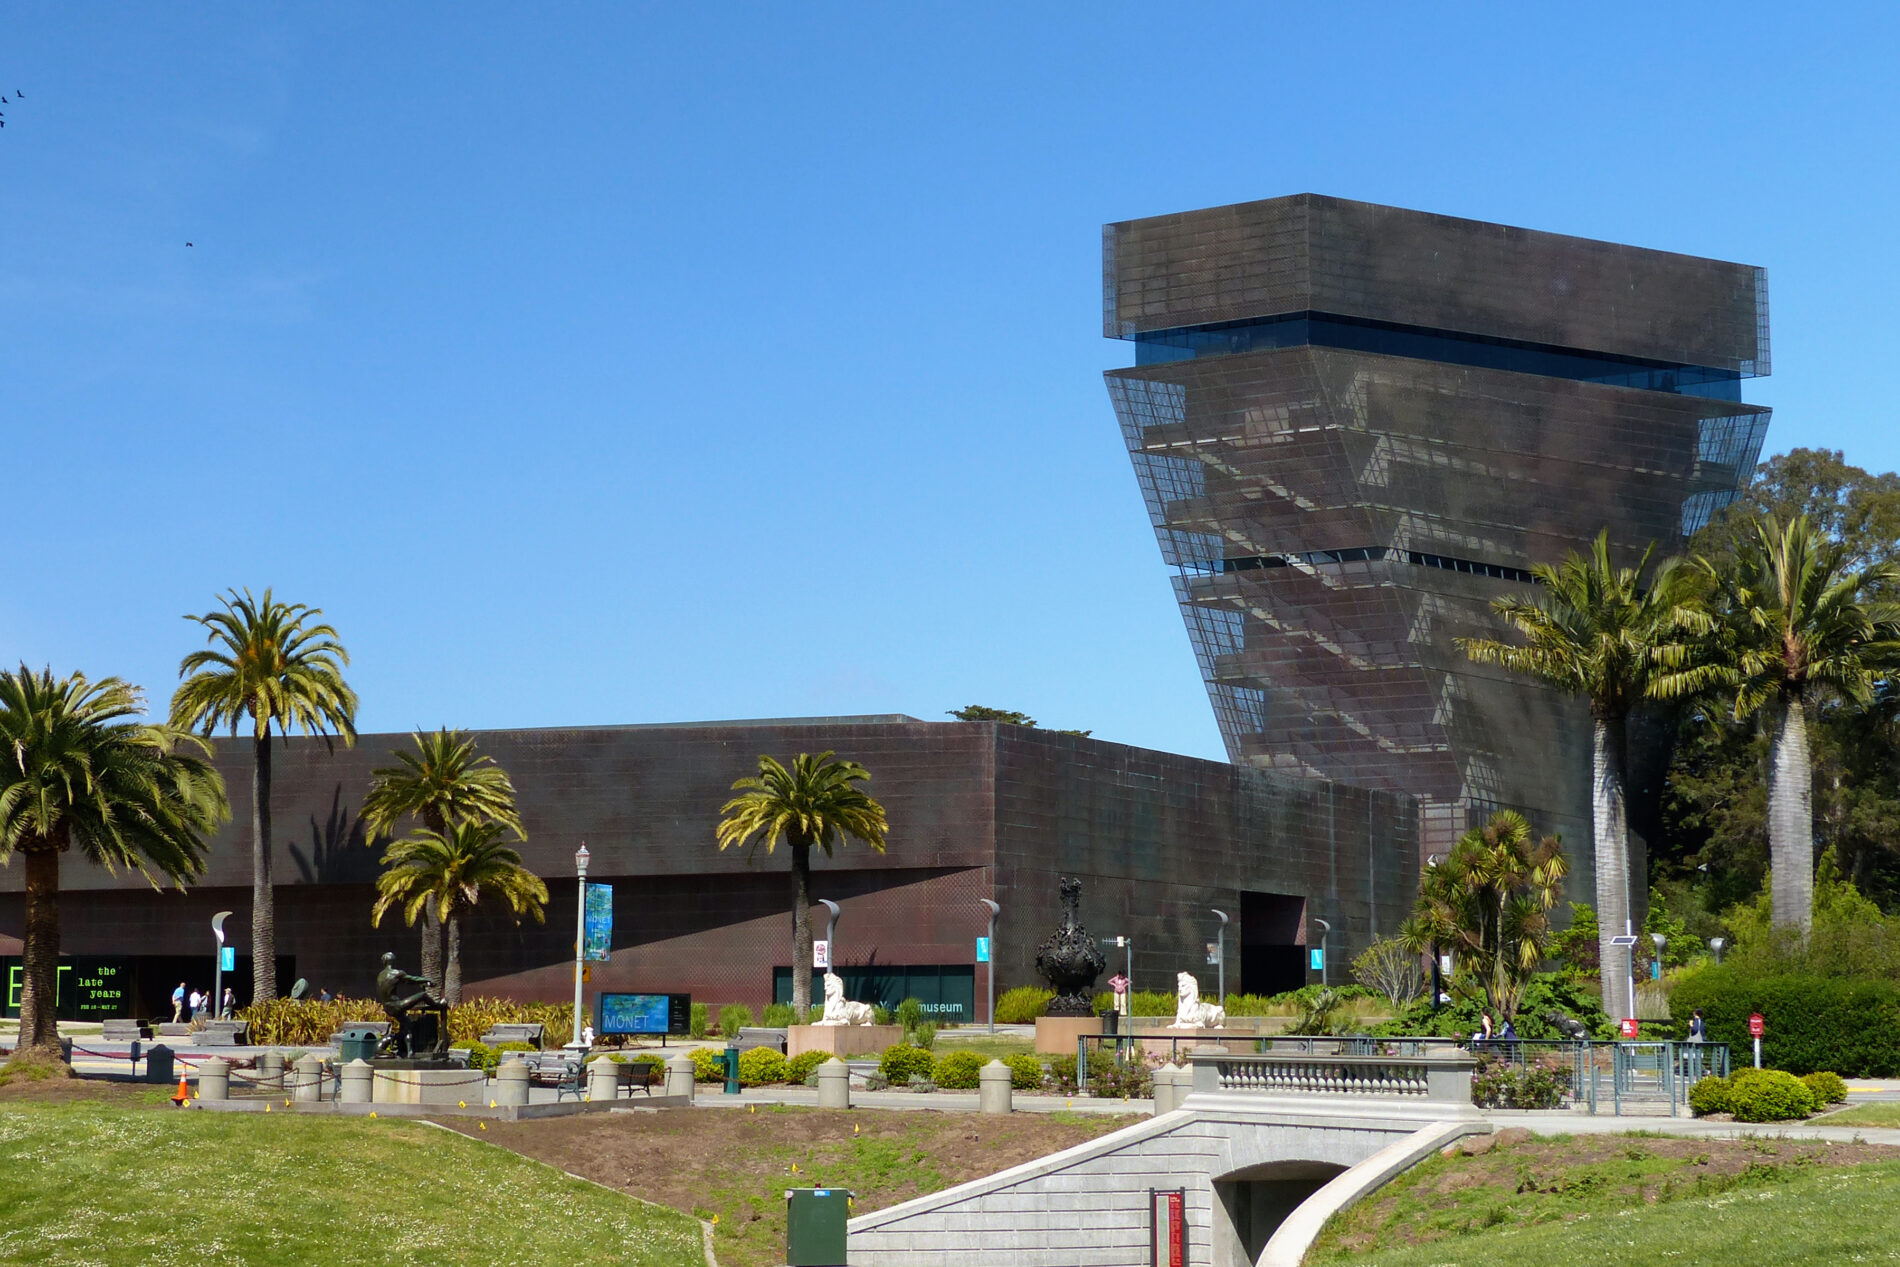 The De Young Museum in Golden Gate Park is a remarkable building clad with perforated copper.